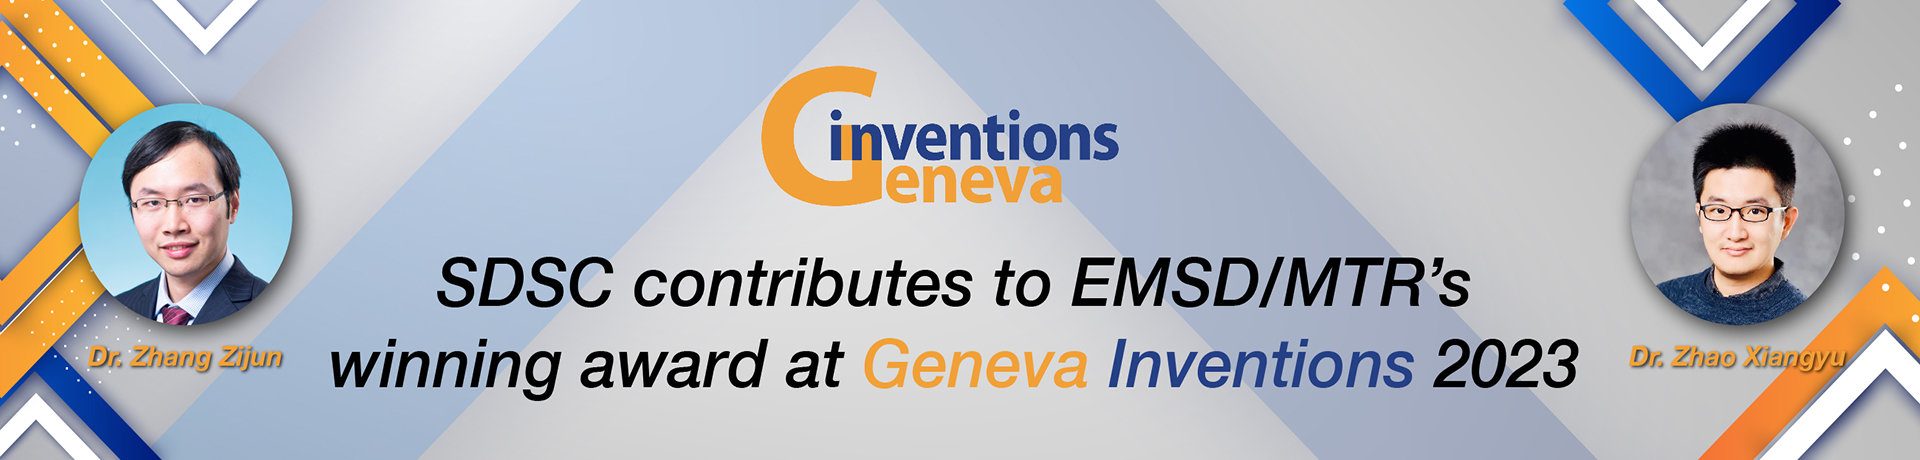 SDSC contributes to EMSD/MTR’s winning award at Geneva Inventions 2023